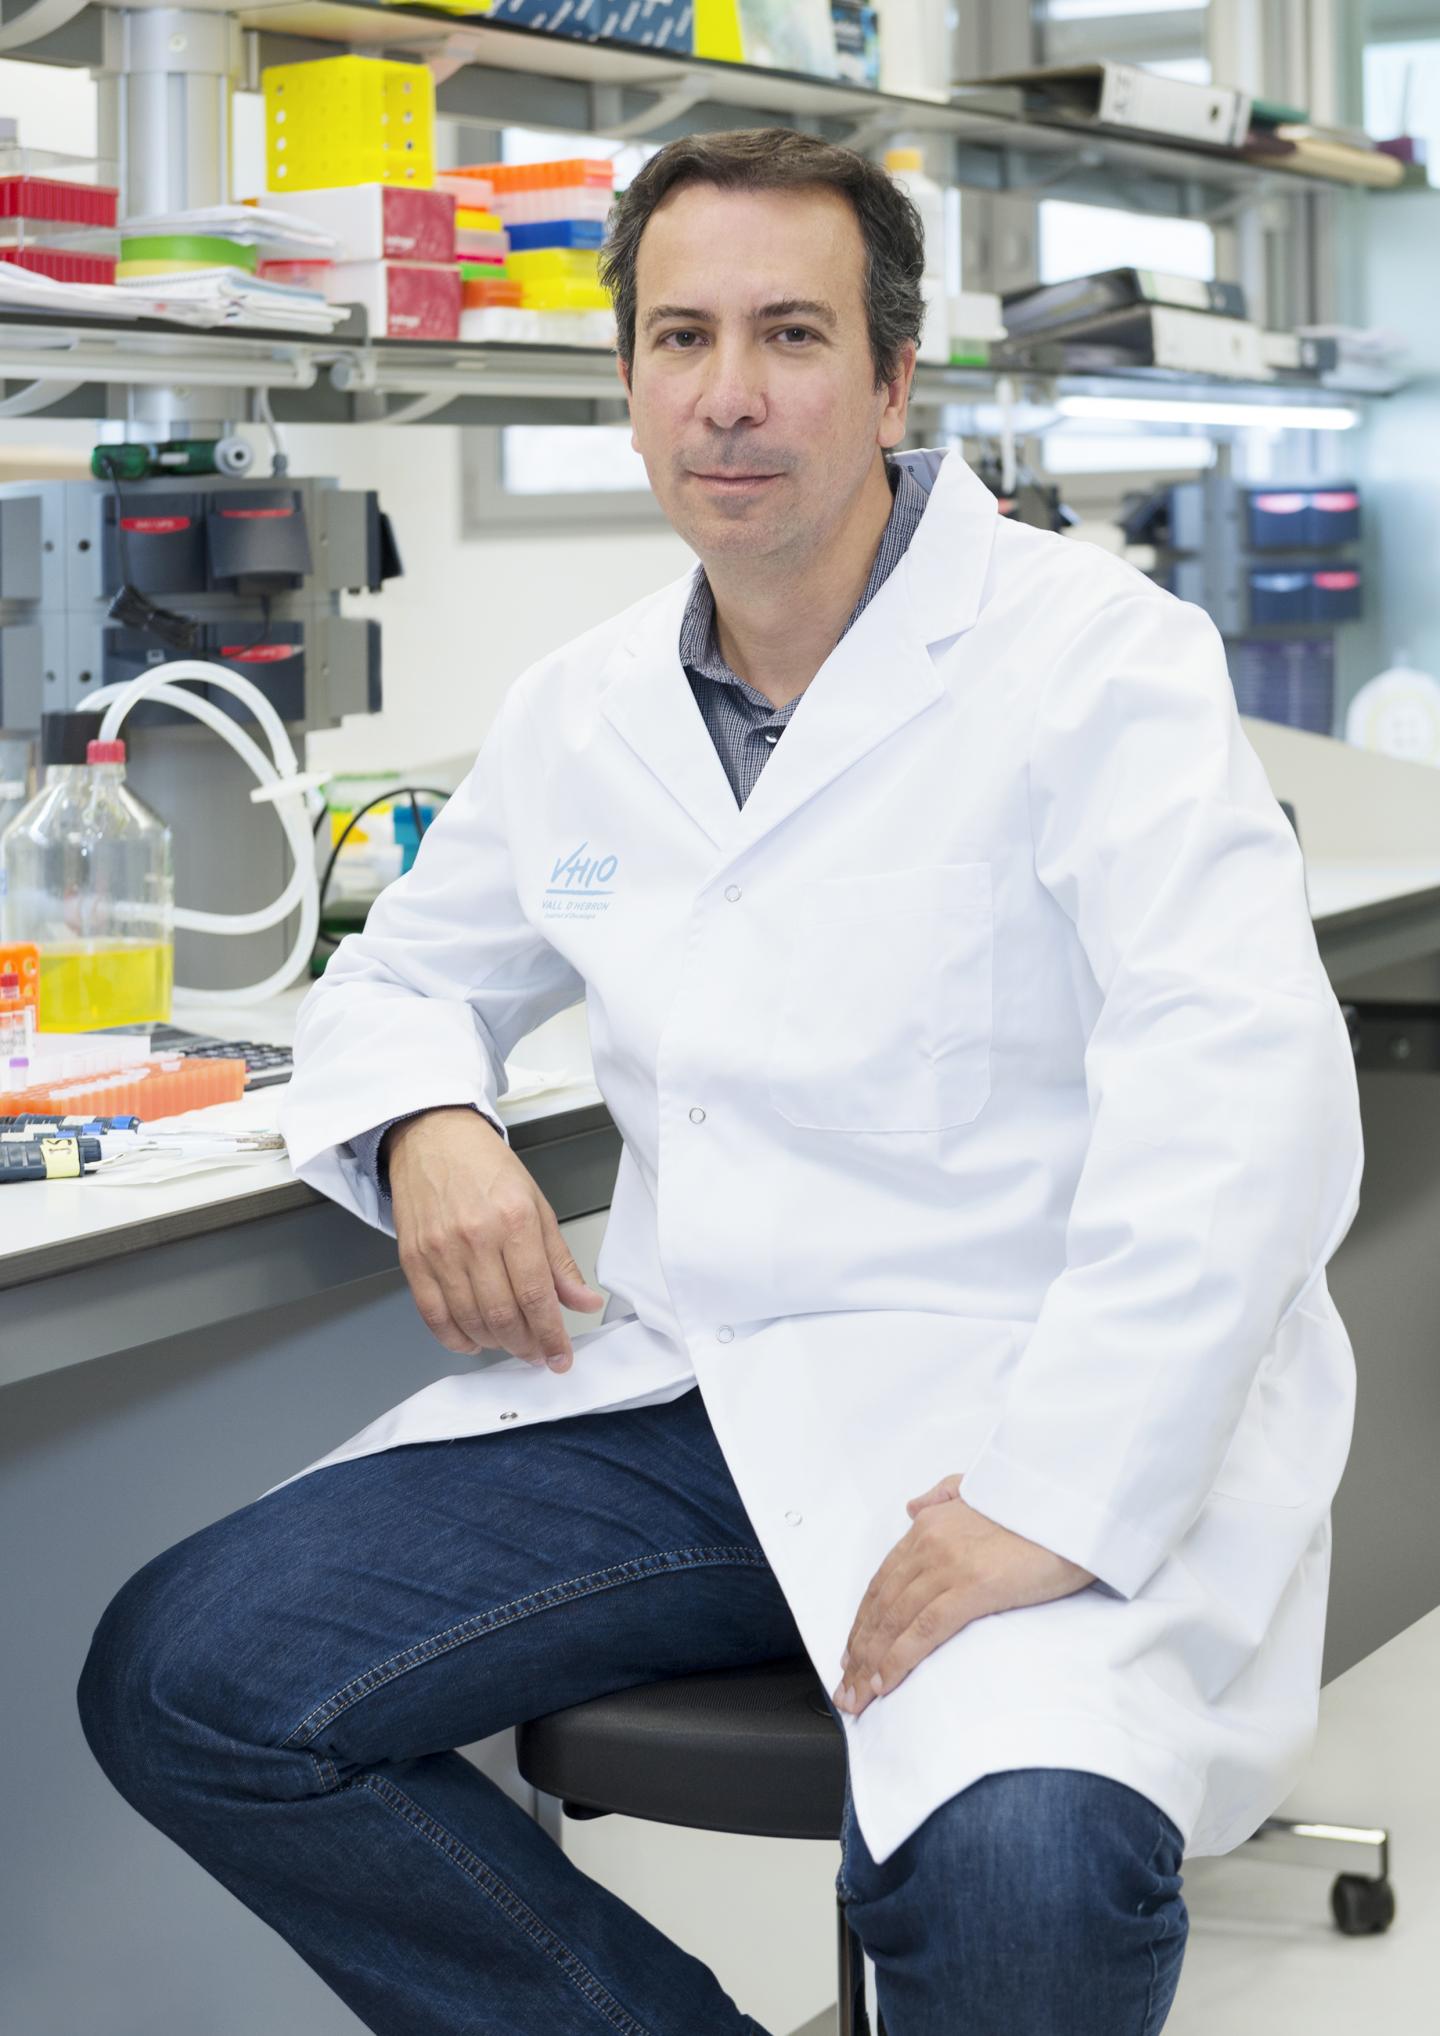 Joan Seoane, Director of Translational Research, Vall d'Hebron Institute of Oncology (VHIO).